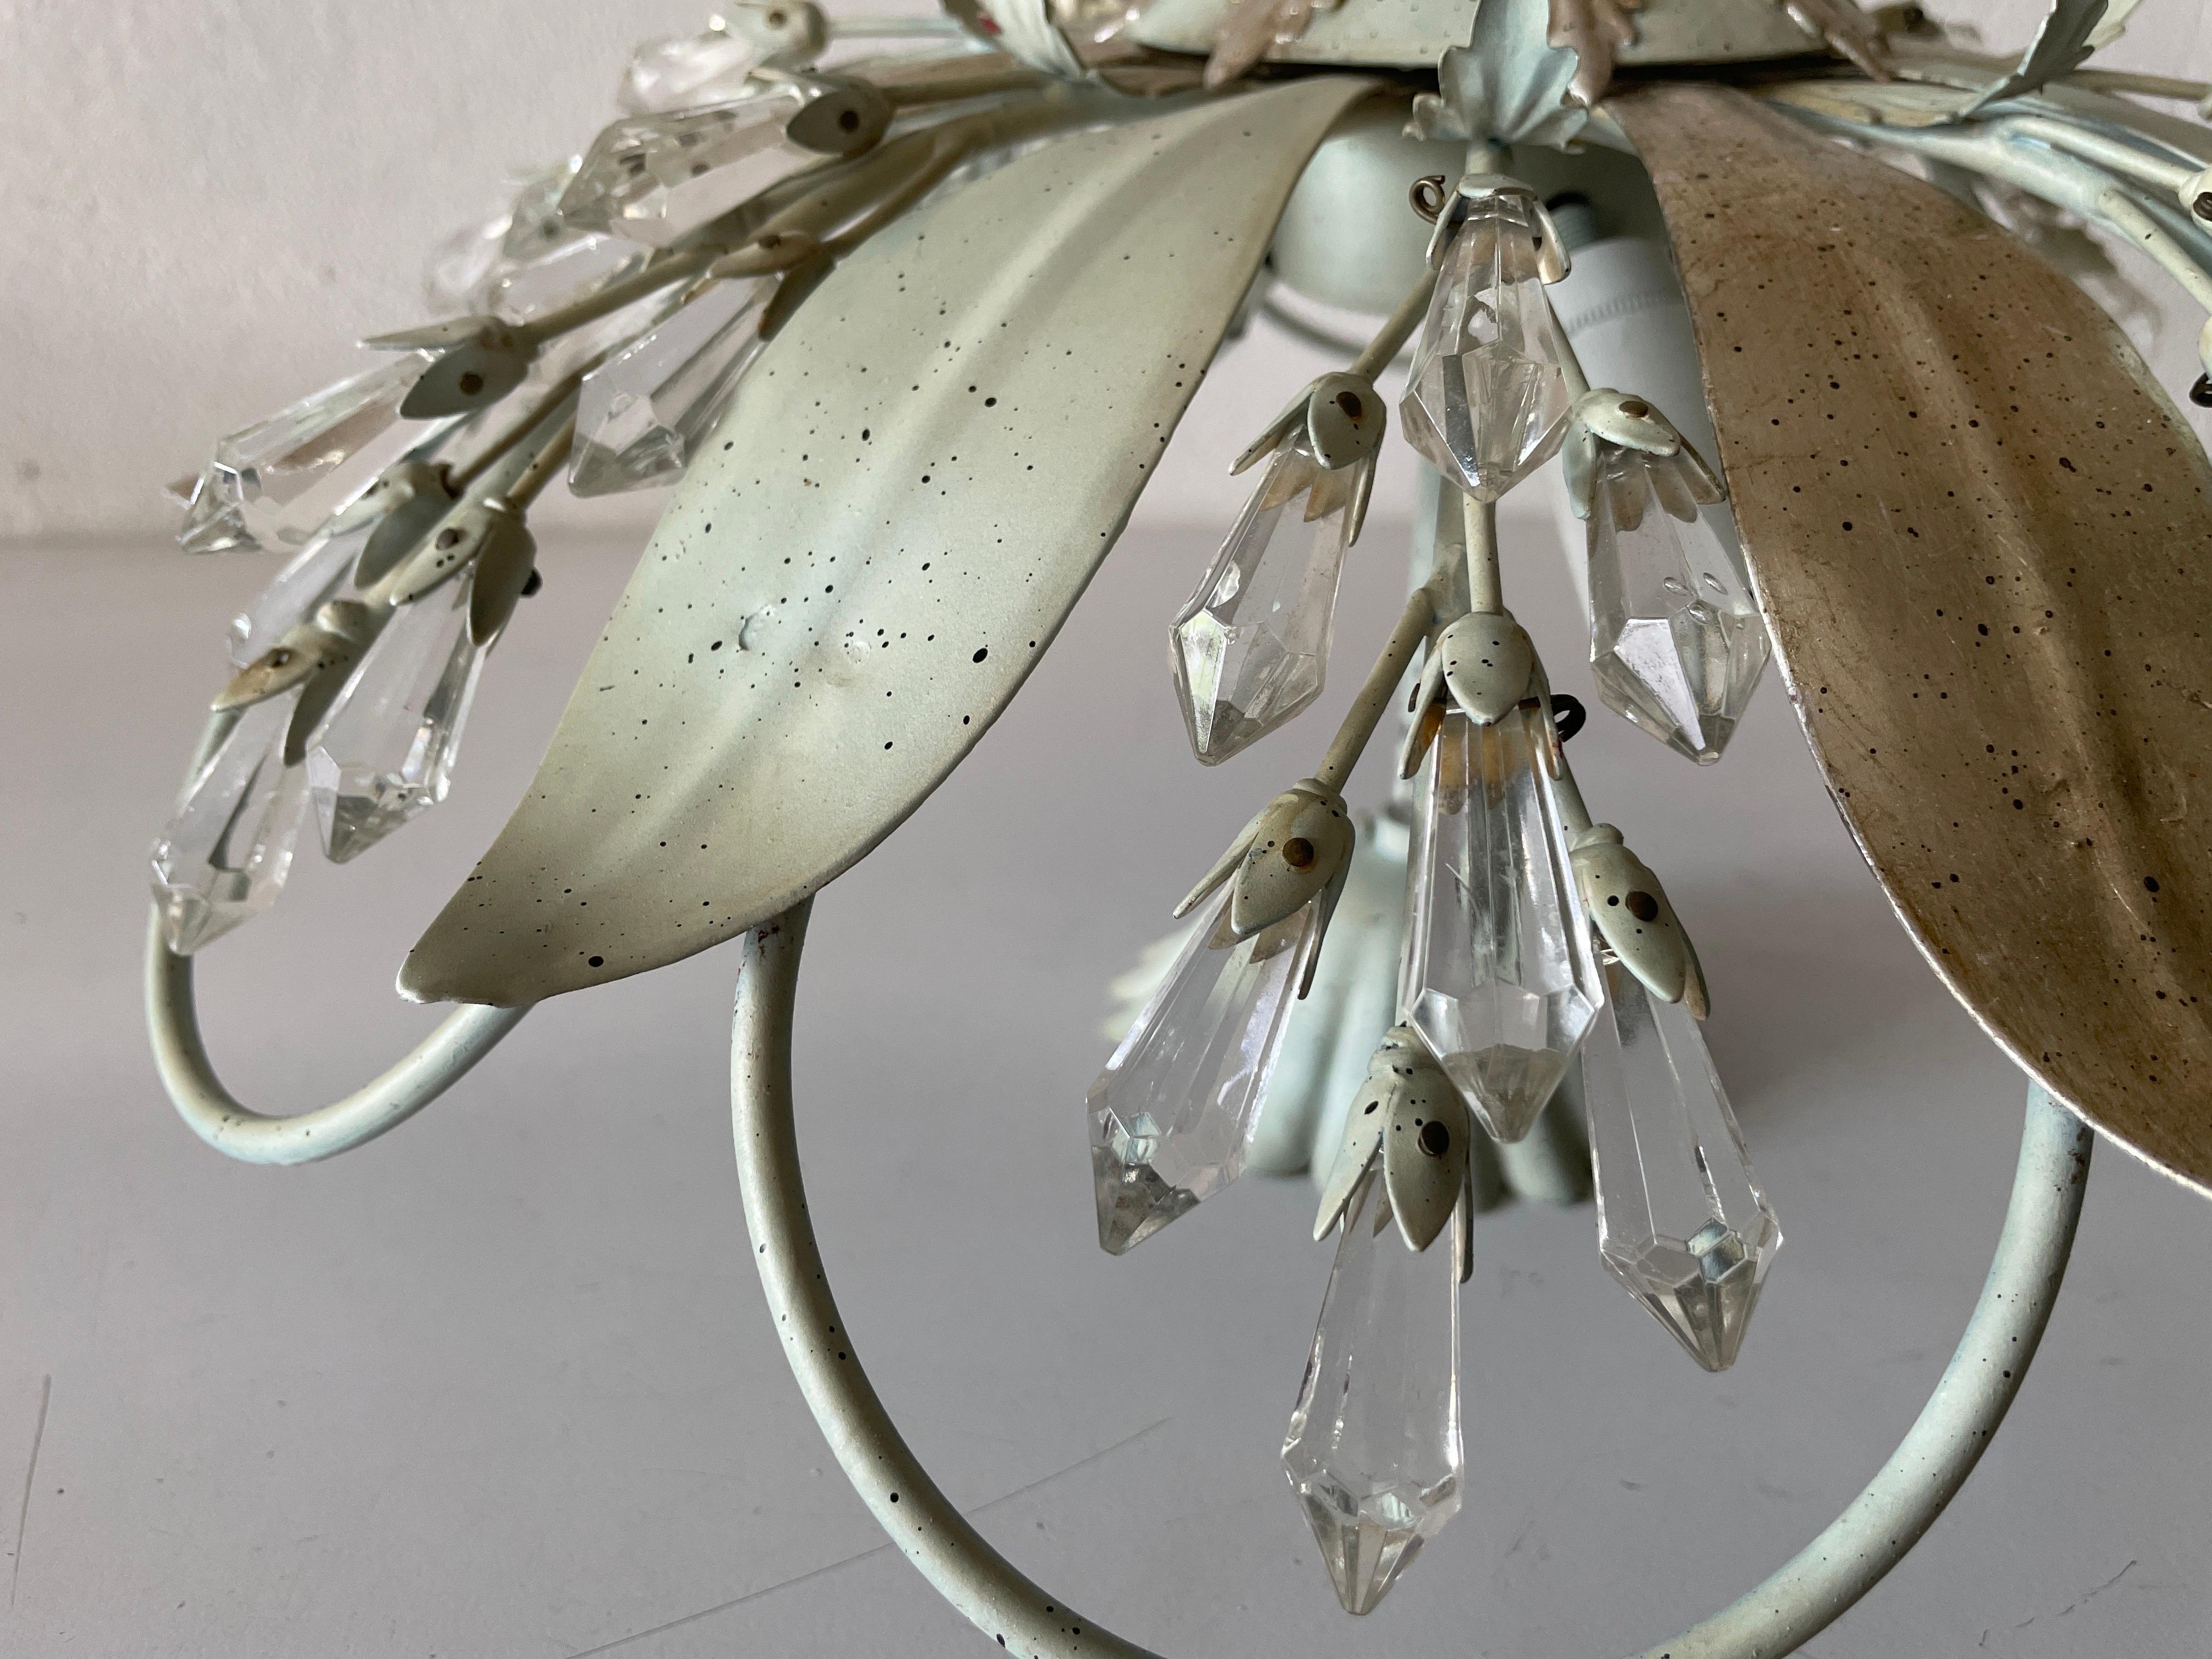 Flower Design Ceiling Lamp with Glass Ornaments, 1950s, Germany For Sale 5